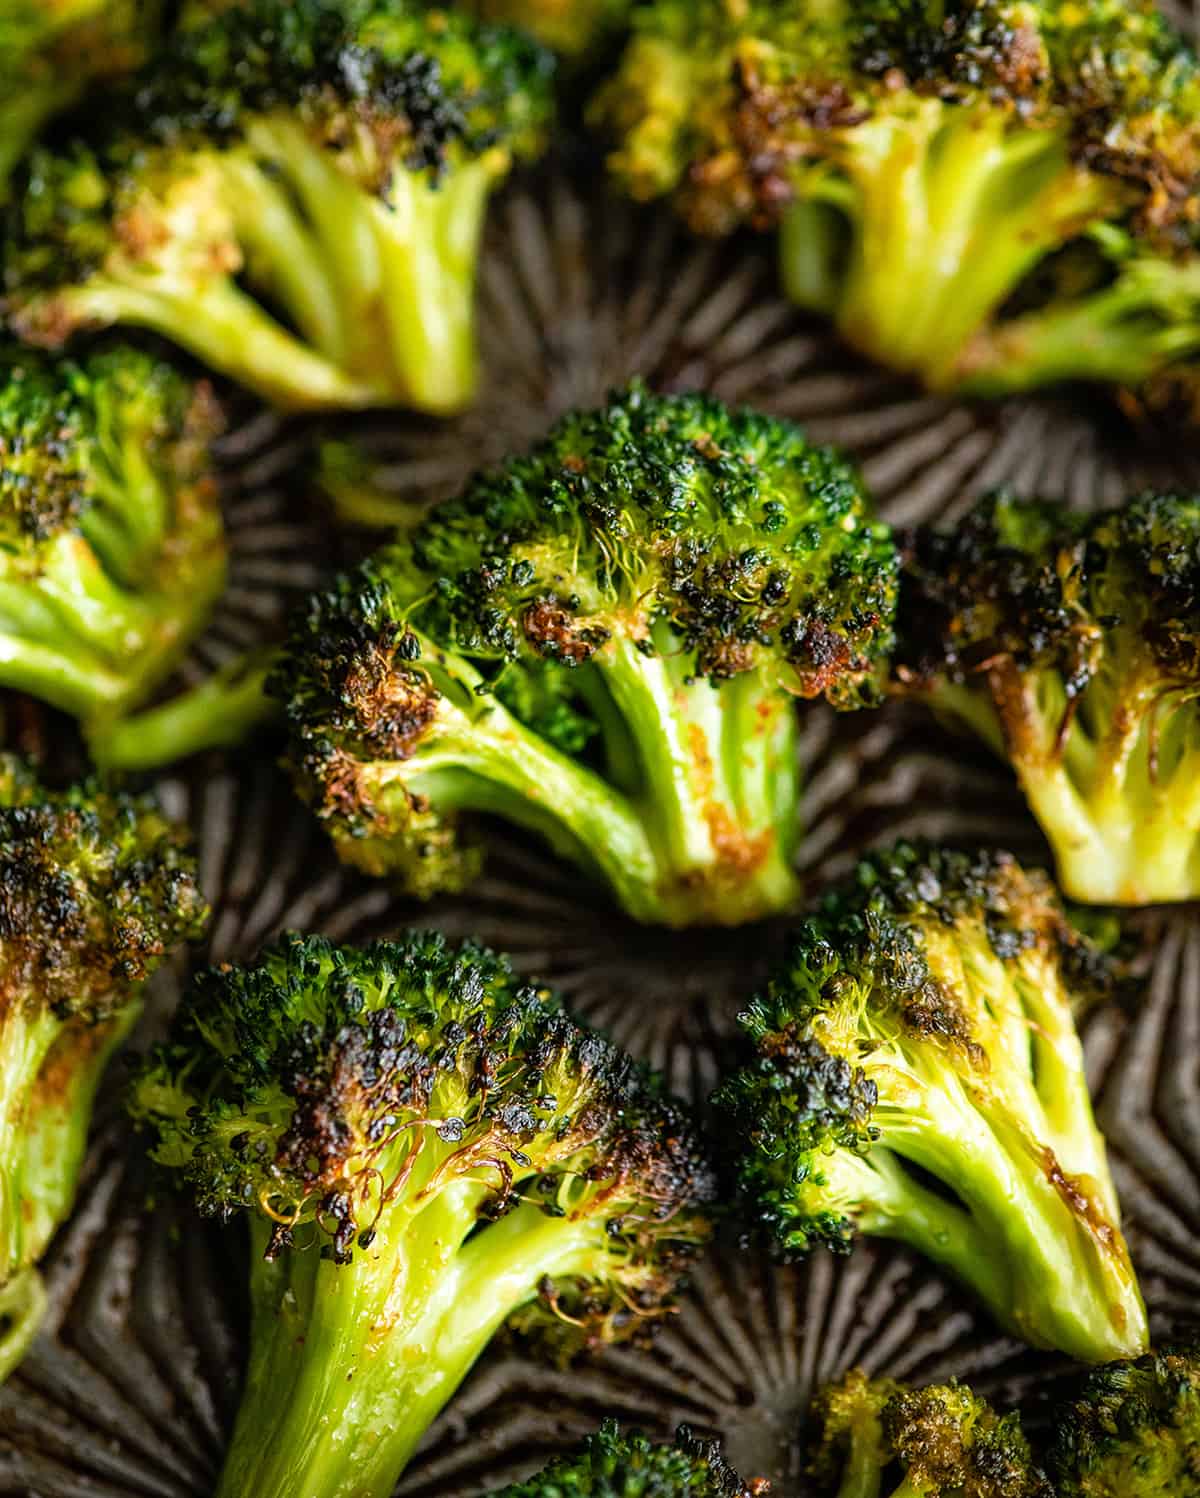 up close overhead view of roasted broccoli on a baking sheet